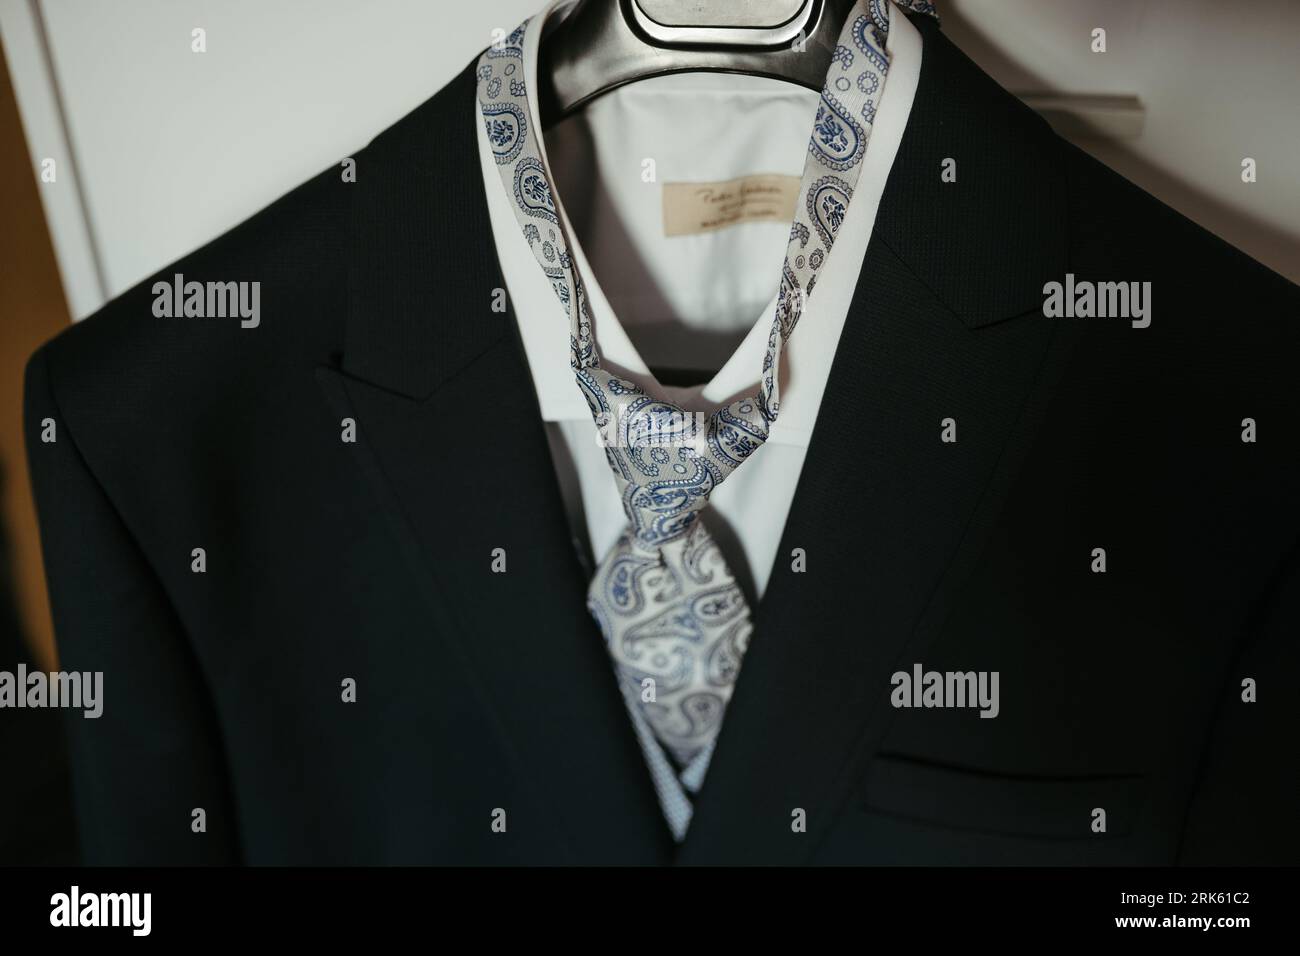 This stock photo features a formal outfit,  a suit, hung up in a doorway Stock Photo